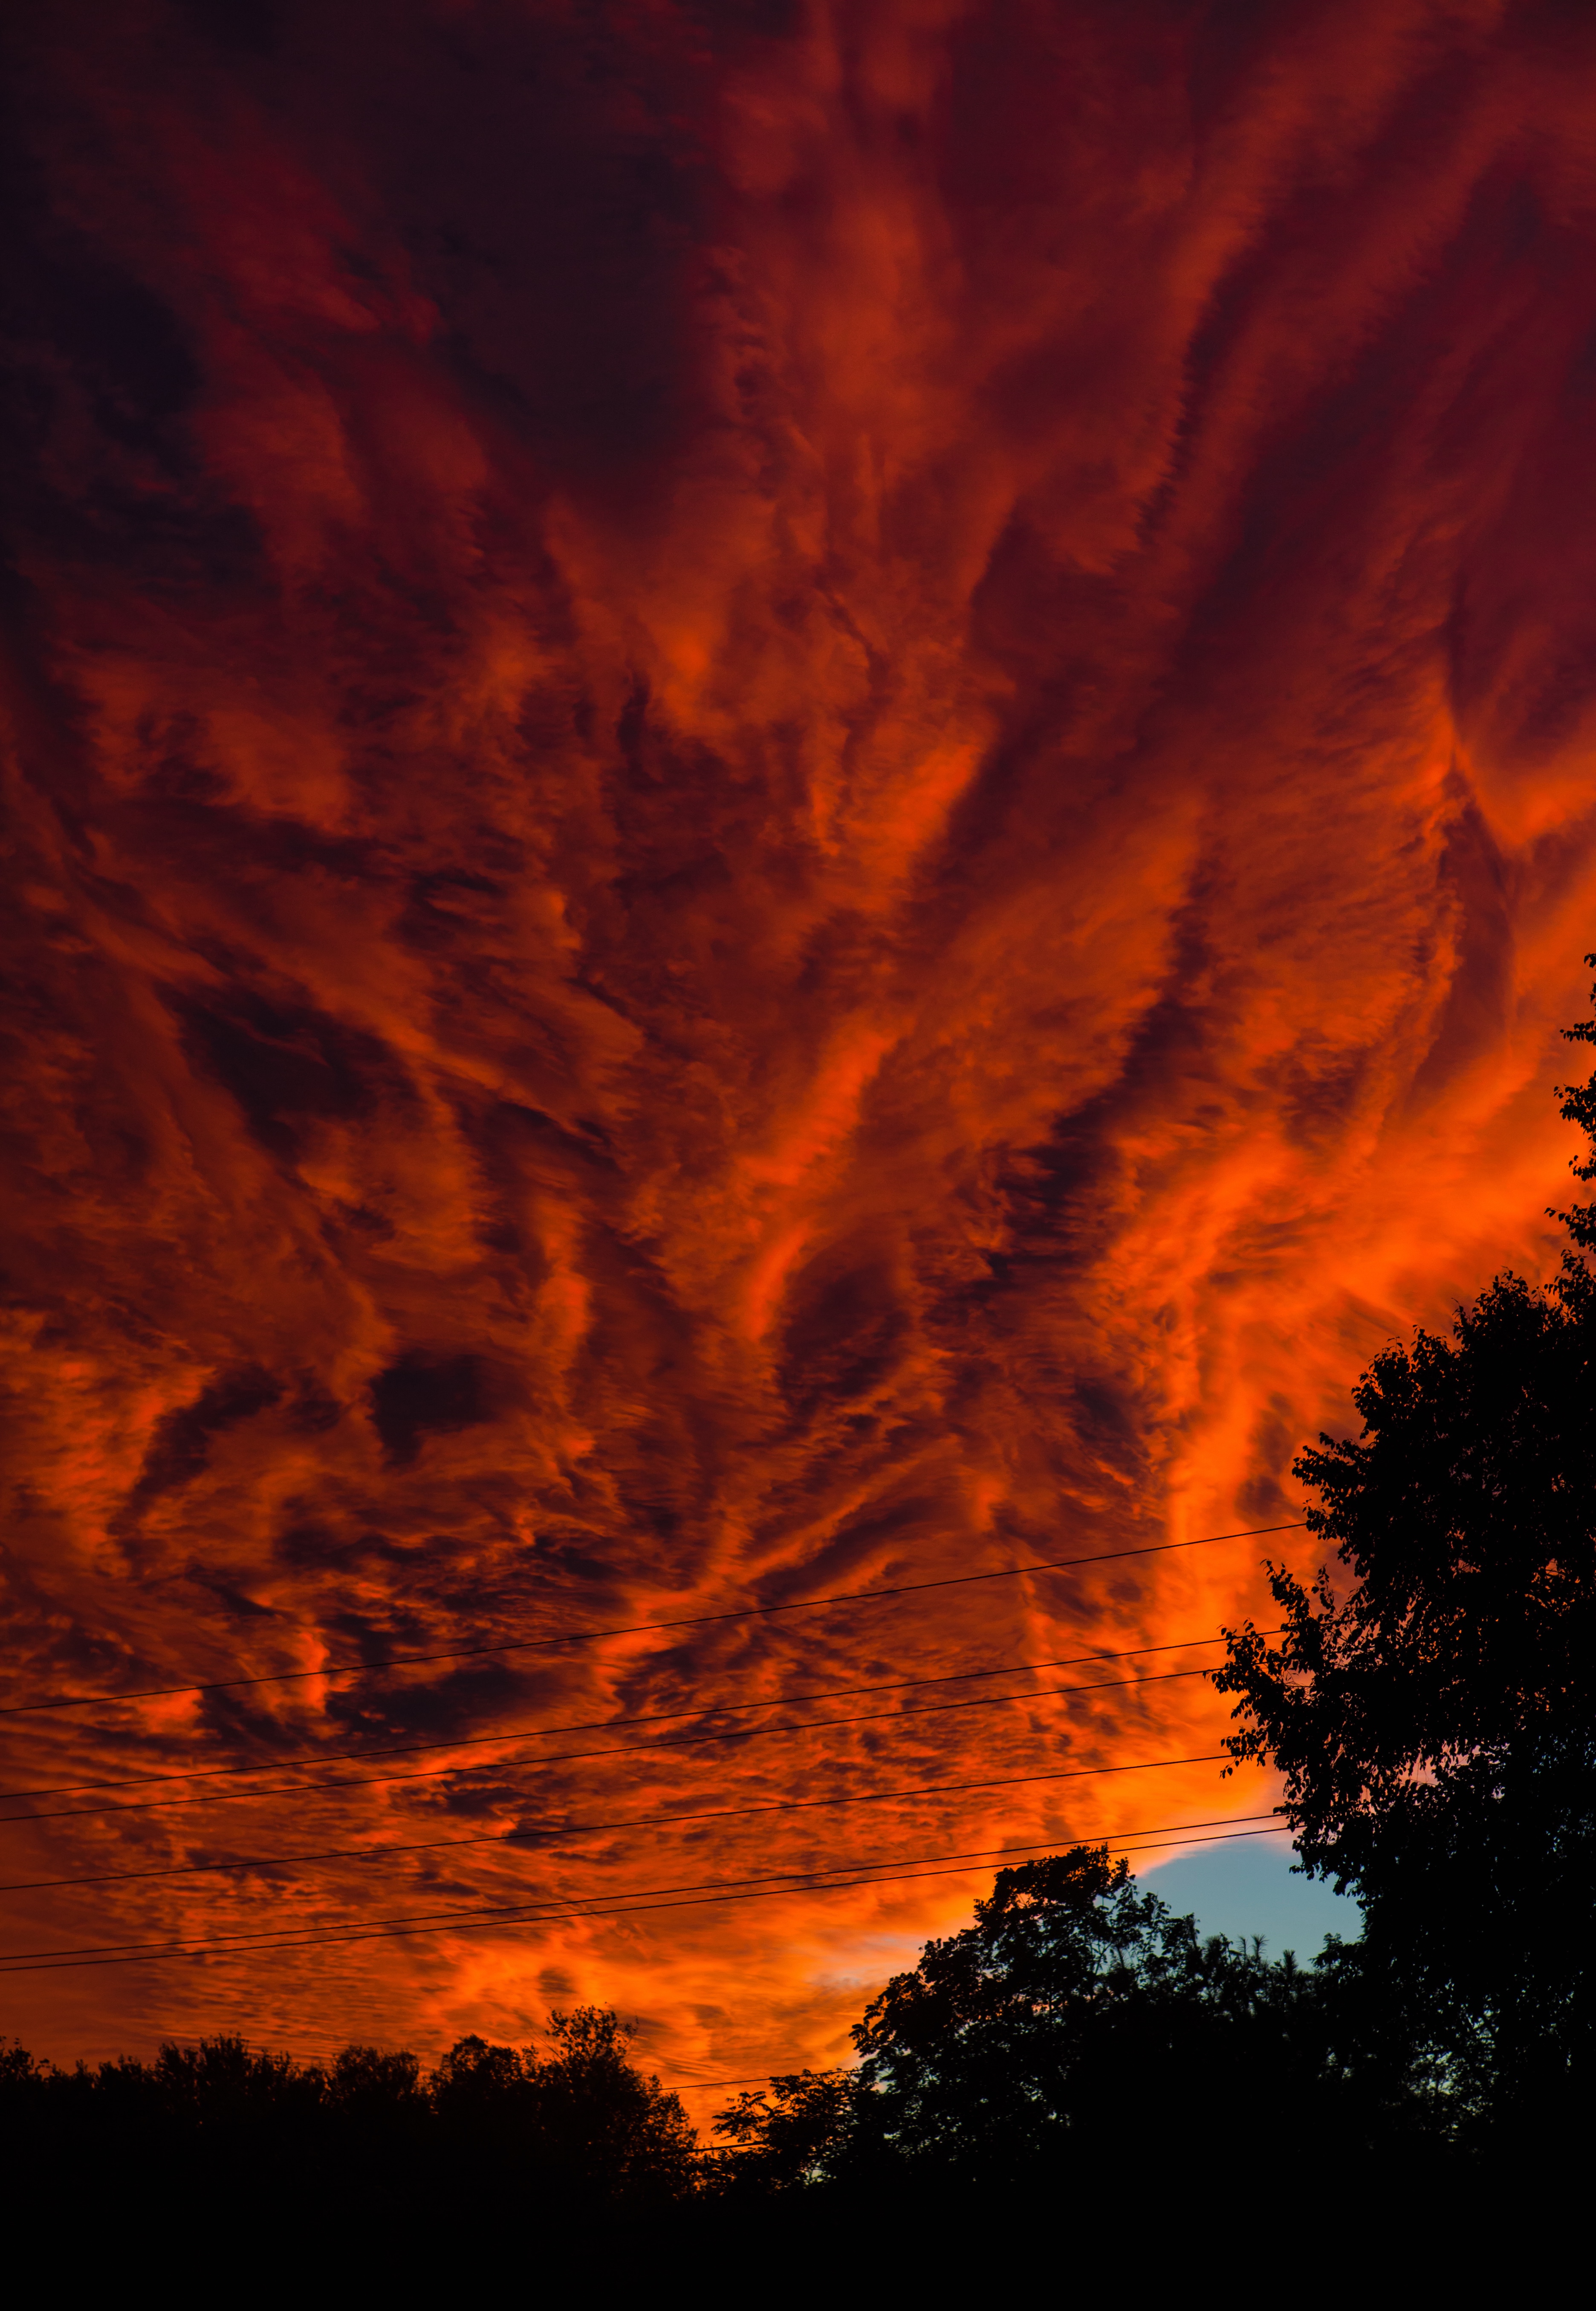 dark, nature, sunset, clouds, porous High Definition image